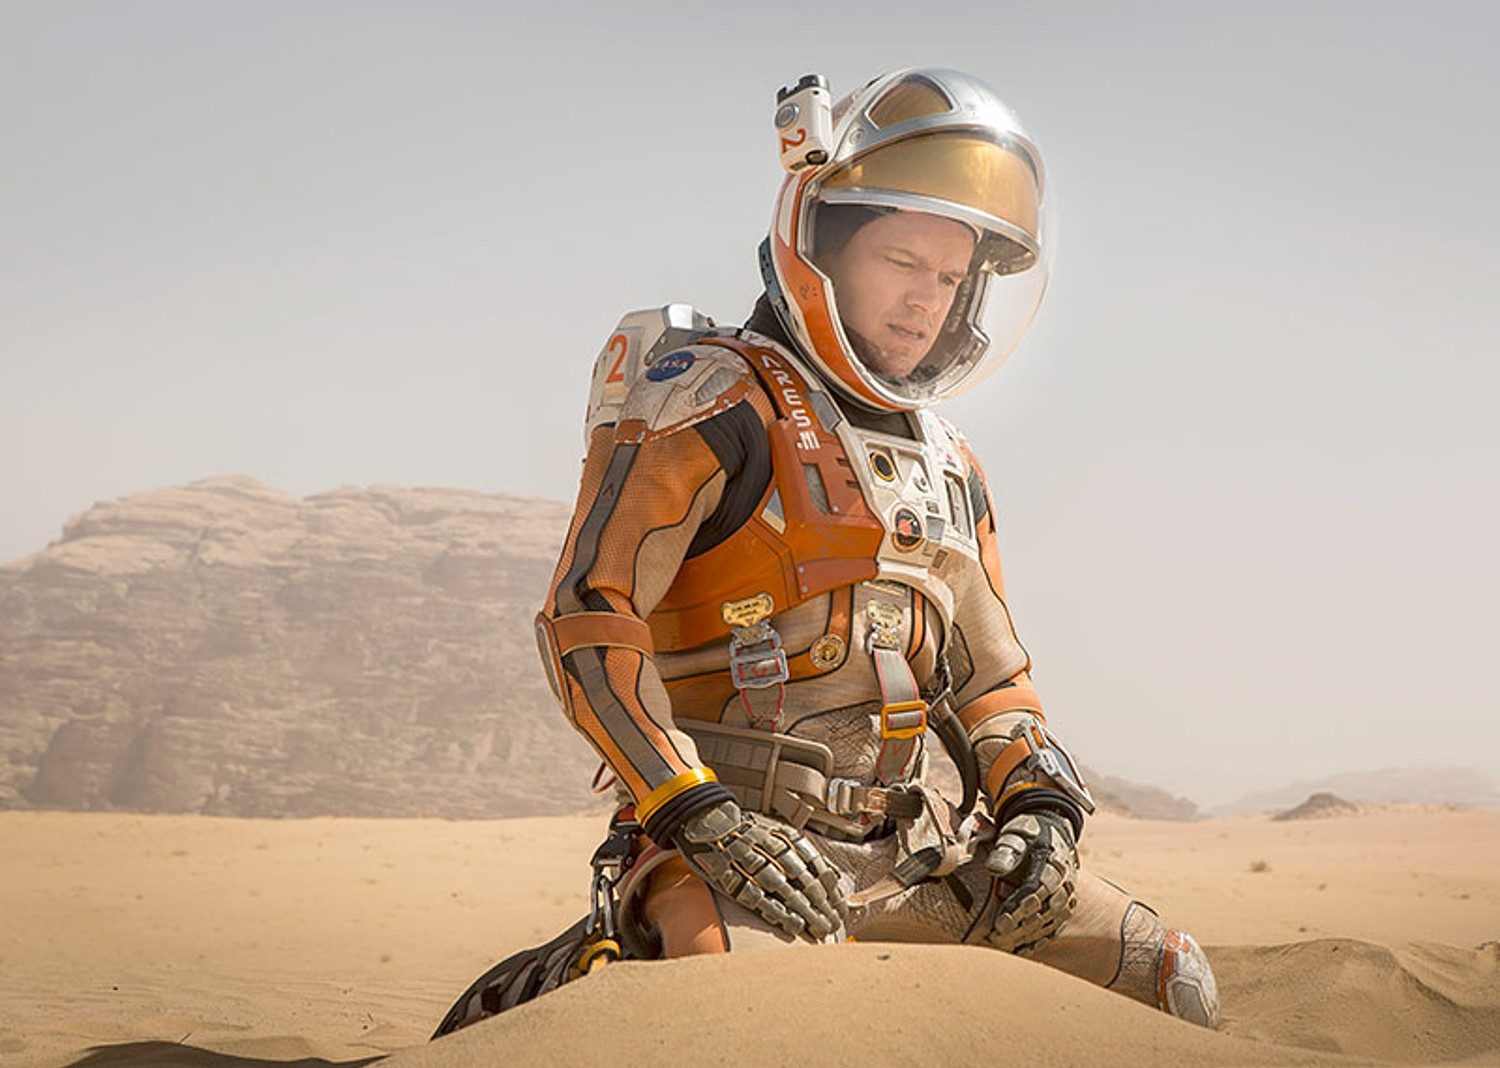 The Martian Movie Wallpapers